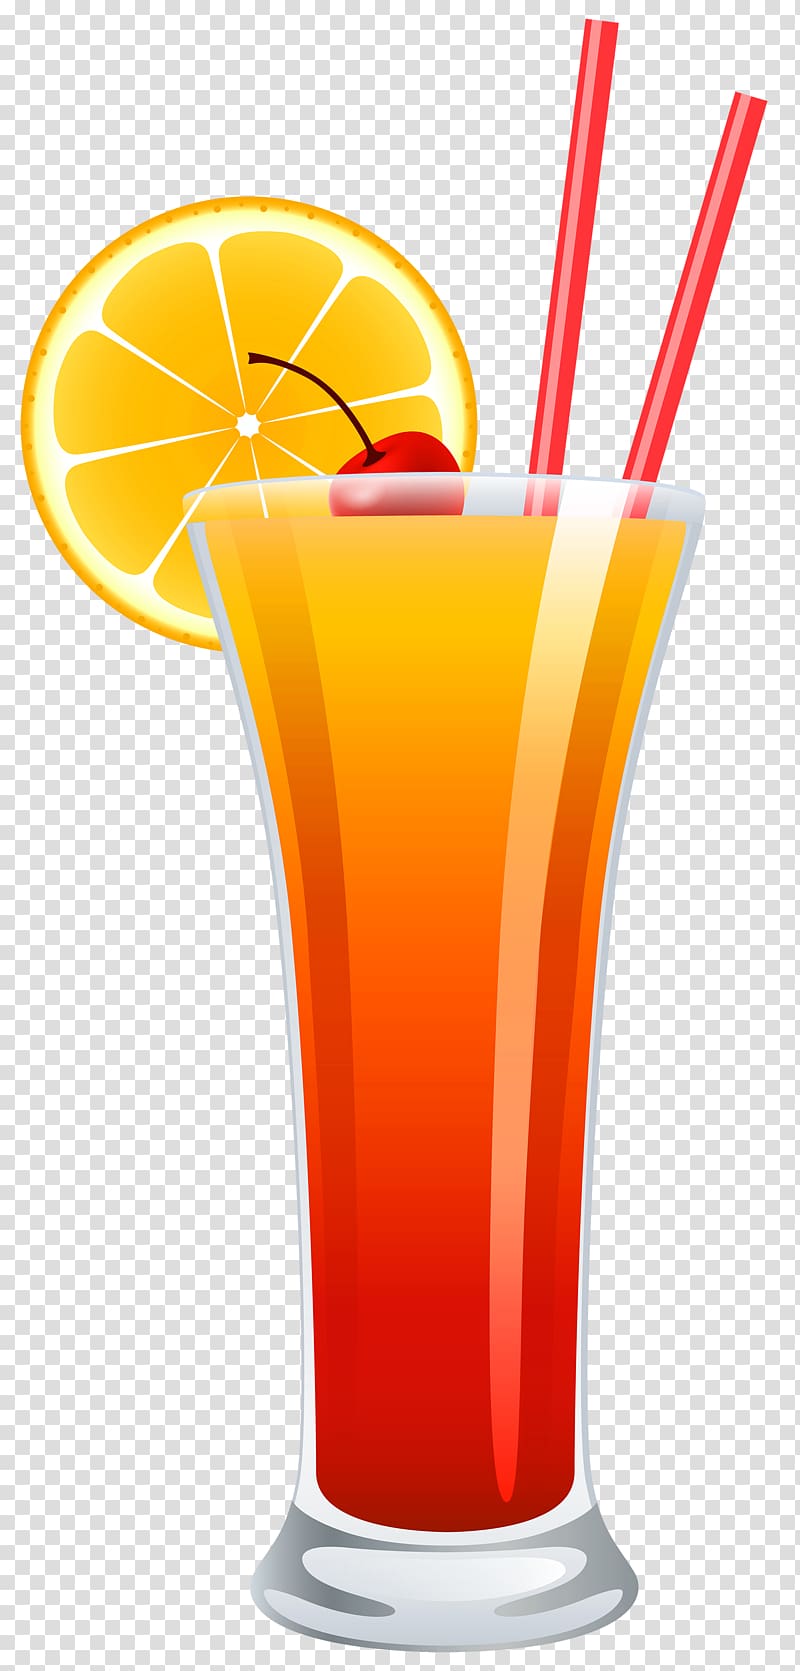 Cocktail Tequila Sunrise Mojito Screwdriver Margarita, juice transparent background PNG clipart